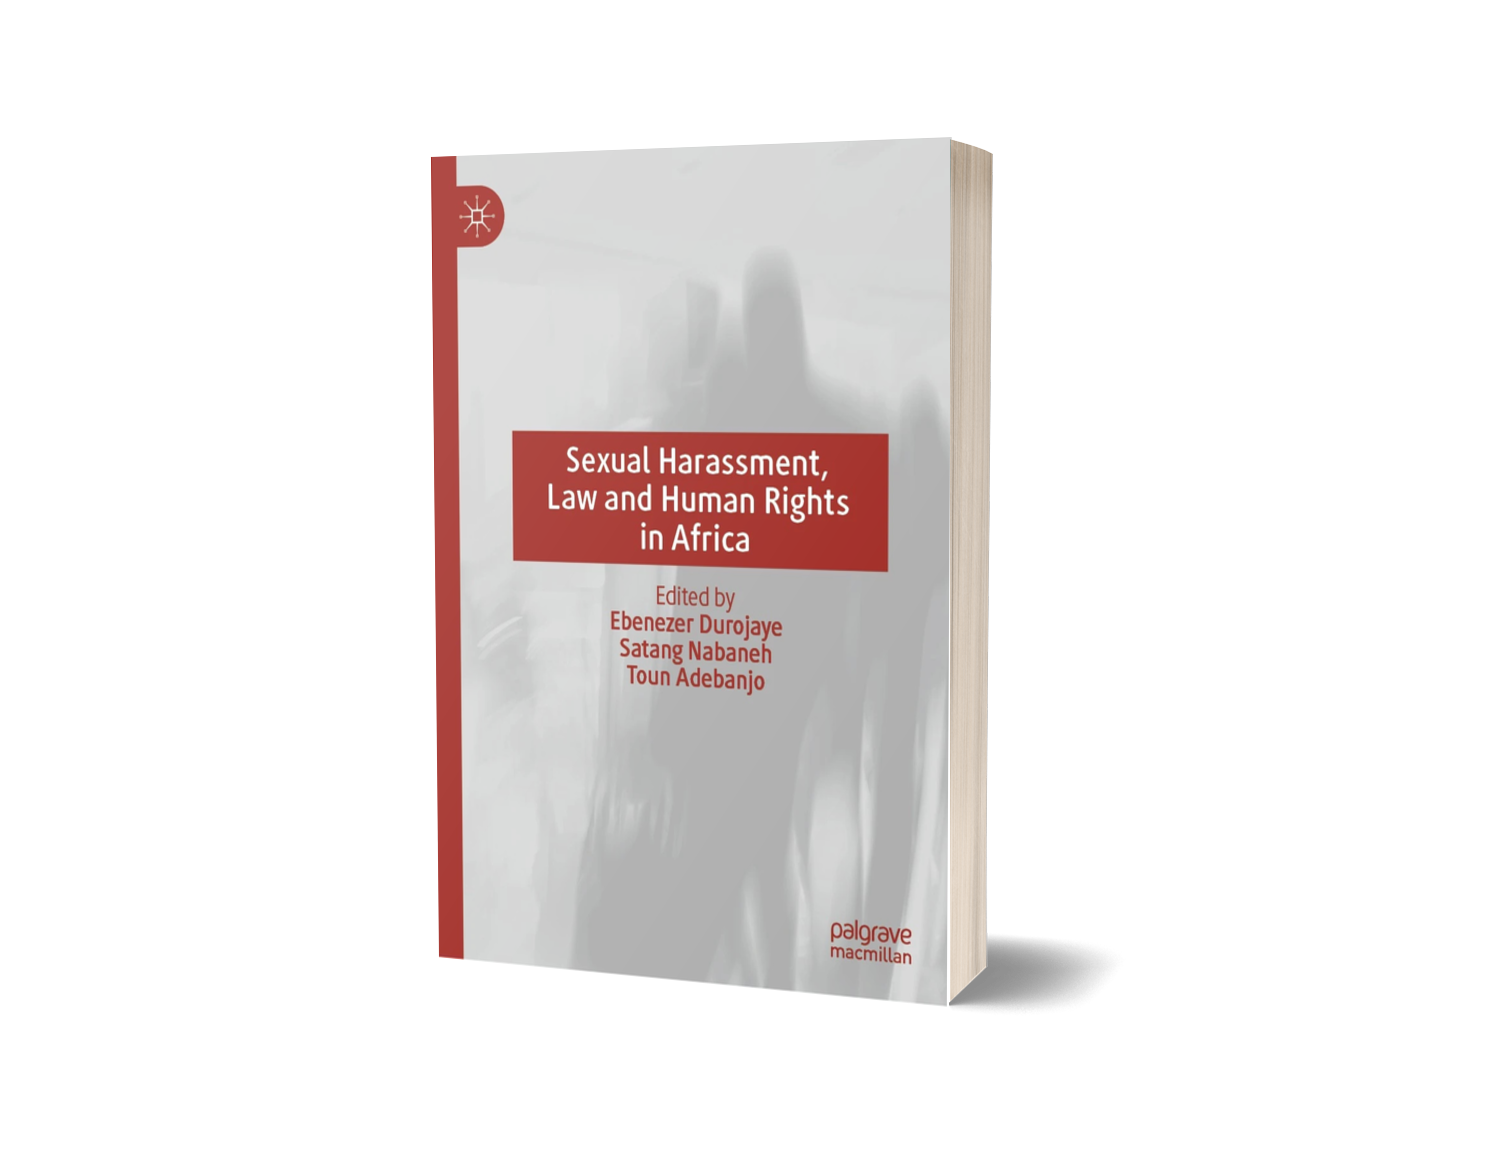 Durojaye, Ebenezer (with Satang Nabaneh, and Toun Adebanjo) (eds.) Sexual Harassment, Law and Human Rights in Africa (Springer, 2023)